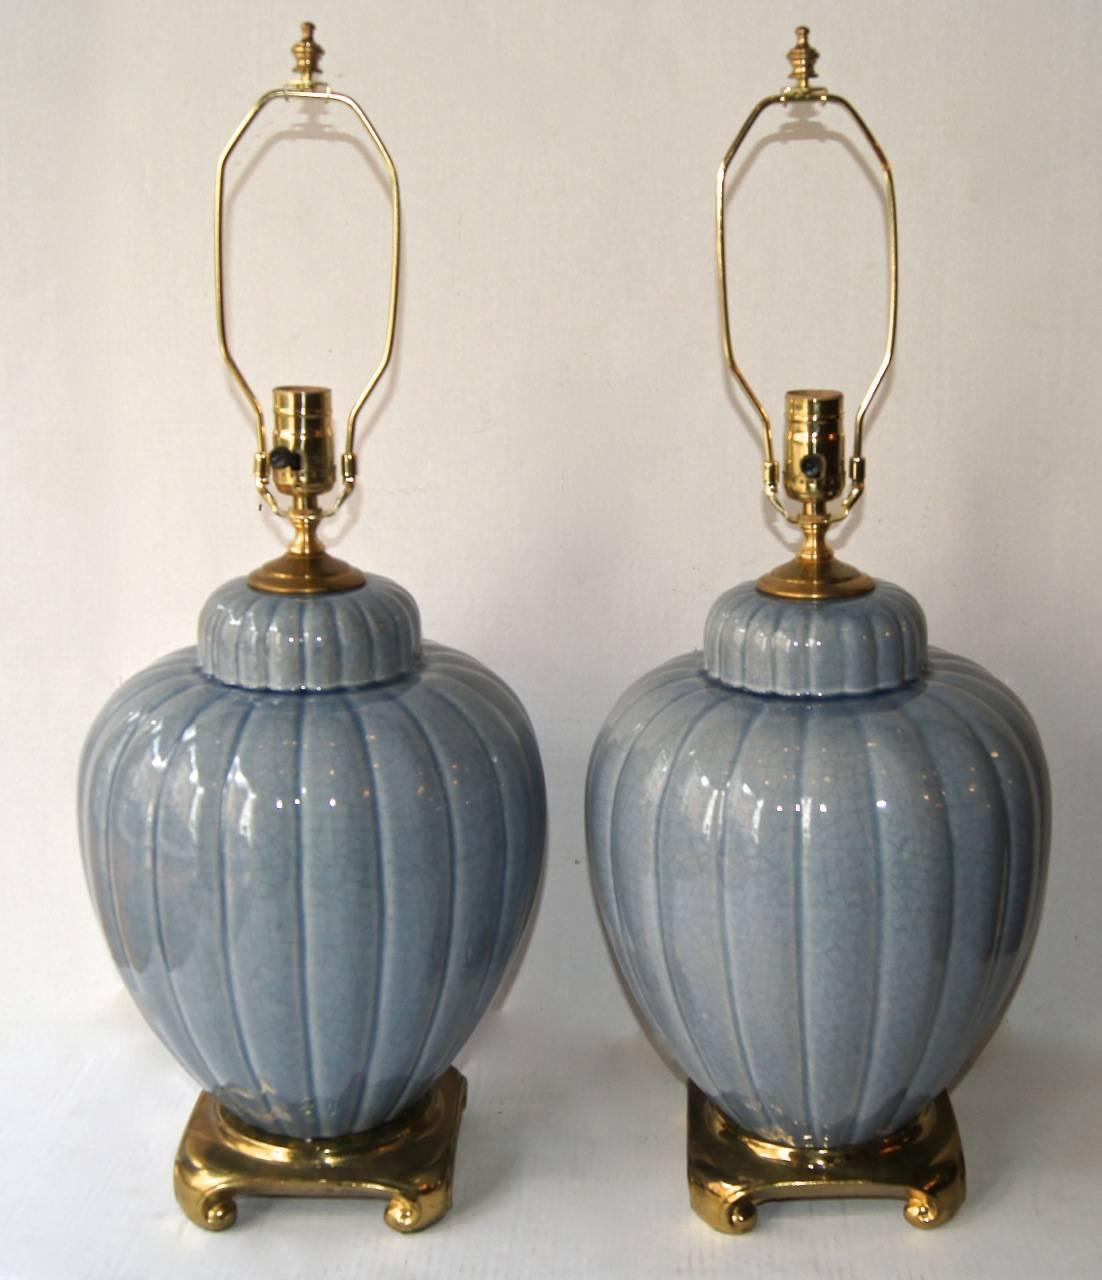 Pair of circa 1960s Italian glazed porcelain table lamps with gilt bases.

Measurements:
Height of body: 15